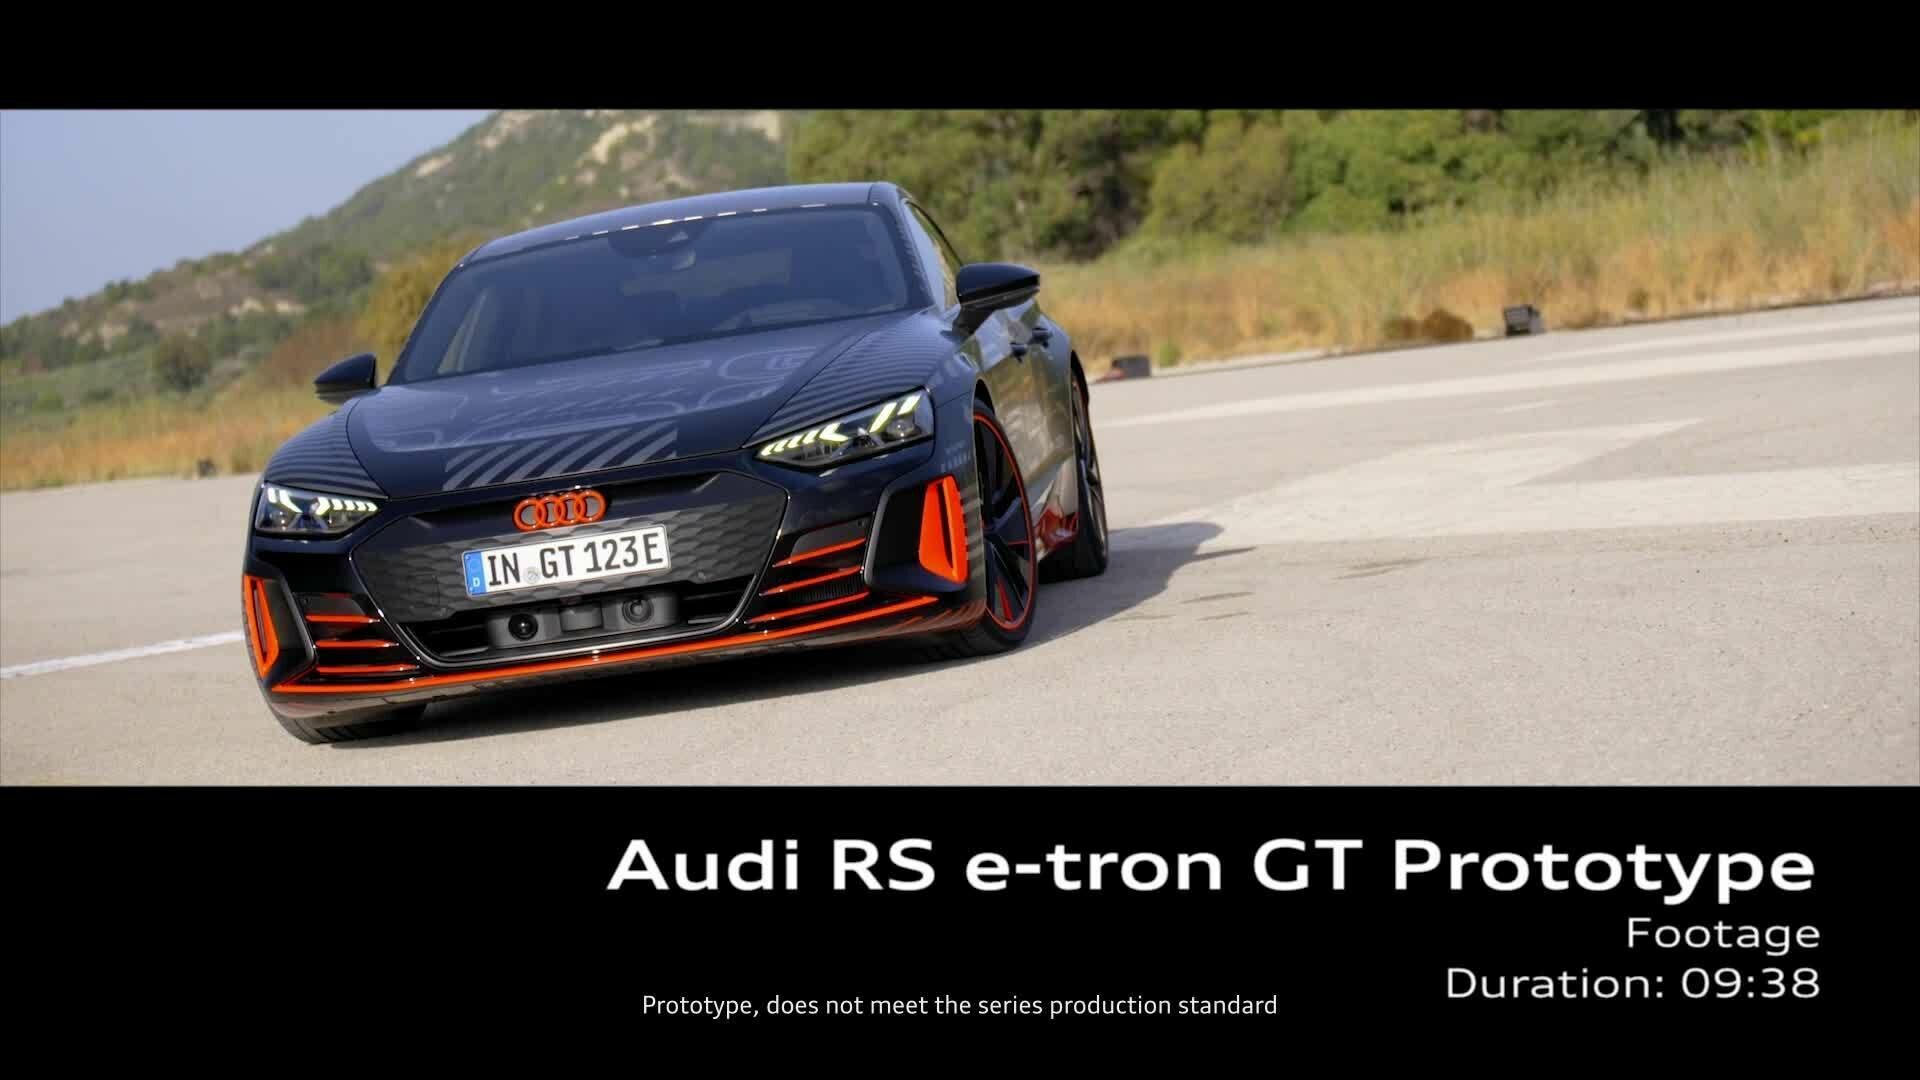 Footage: Audi RS e-tron GT Prototype on location